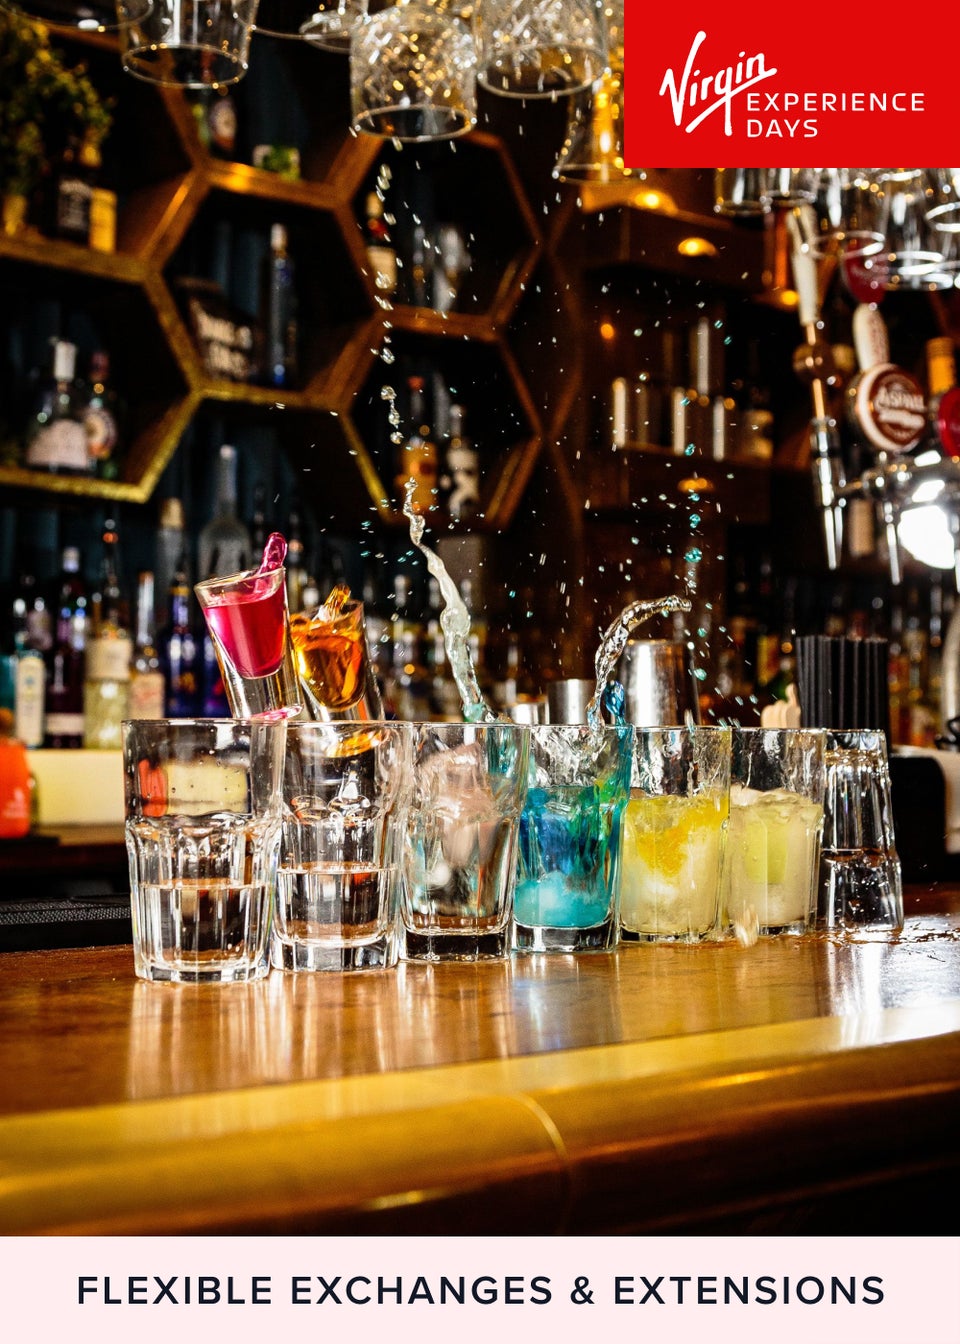 Virgin Experience Days Cocktail Masterclass for Two at Revolution Bars